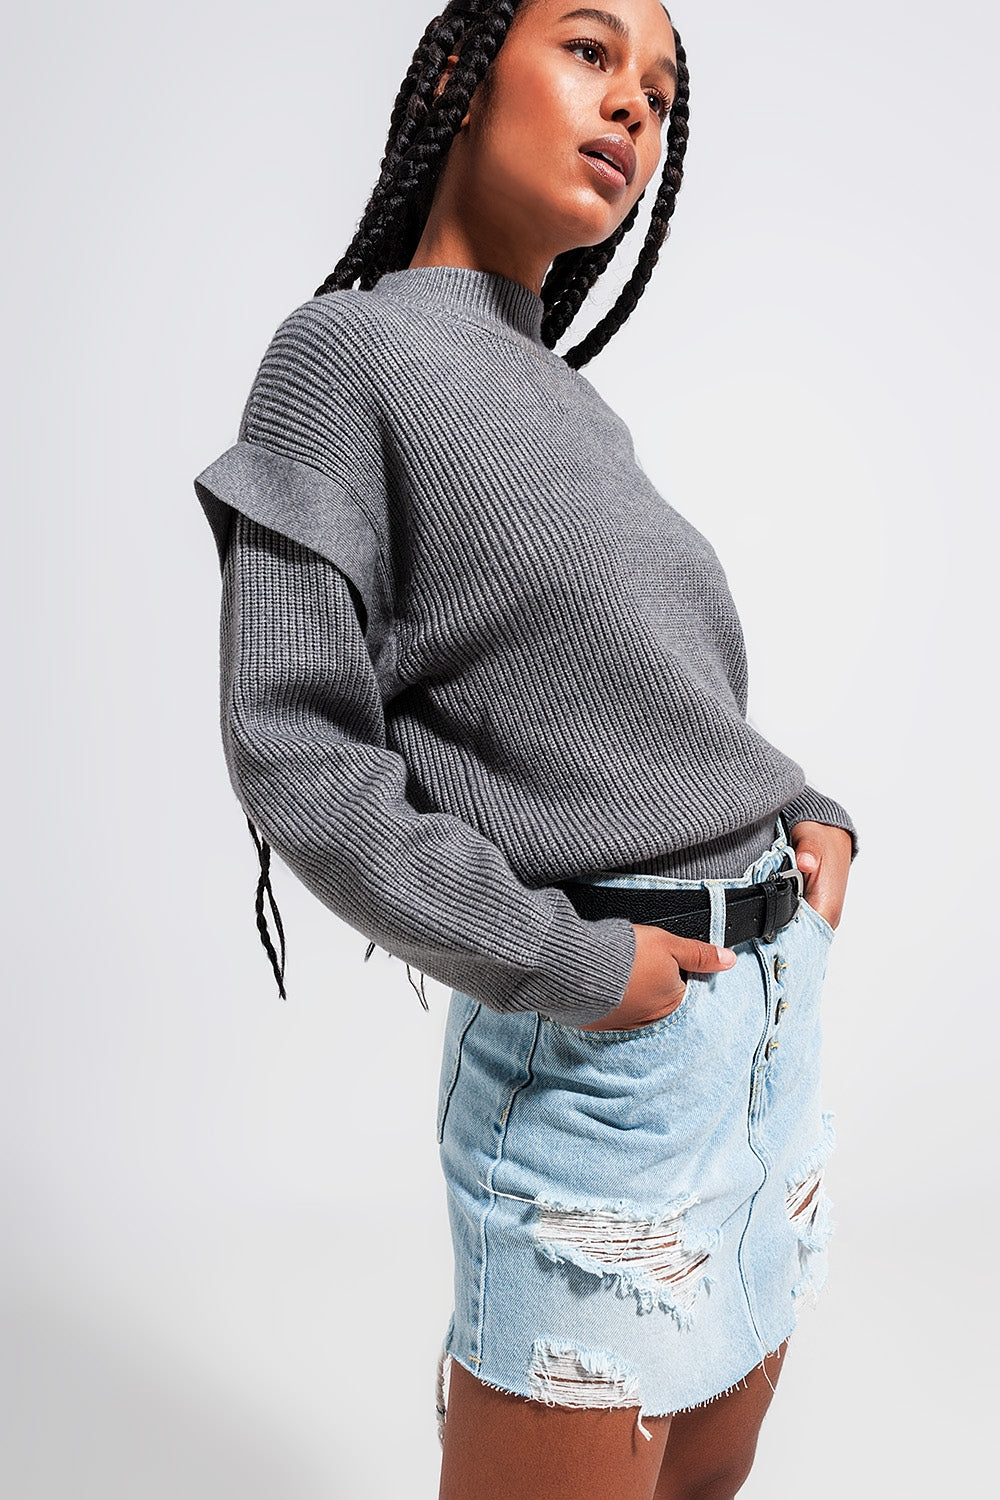 Q2 Sleeve detail jumper in gray color